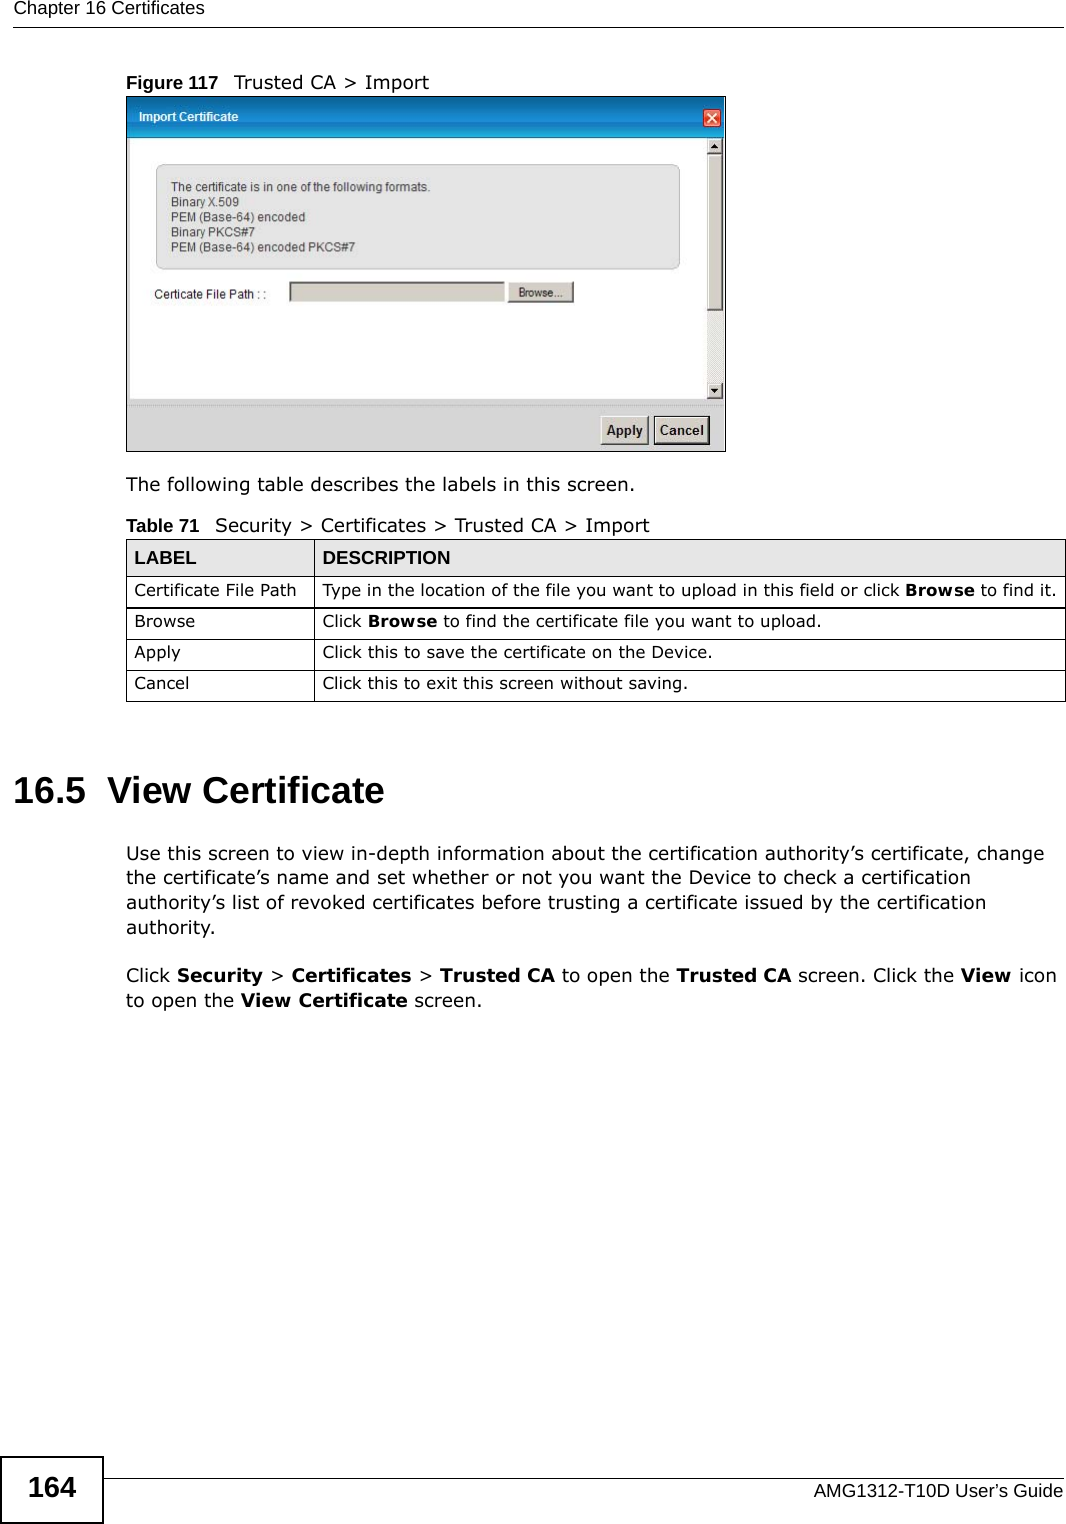 Chapter 16 CertificatesAMG1312-T10D User’s Guide164Figure 117   Trusted CA &gt; ImportThe following table describes the labels in this screen.16.5  View Certificate Use this screen to view in-depth information about the certification authority’s certificate, change the certificate’s name and set whether or not you want the Device to check a certification authority’s list of revoked certificates before trusting a certificate issued by the certification authority.Click Security &gt; Certificates &gt; Trusted CA to open the Trusted CA screen. Click the View icon to open the View Certificate screen. Table 71   Security &gt; Certificates &gt; Trusted CA &gt; ImportLABEL DESCRIPTIONCertificate File Path  Type in the location of the file you want to upload in this field or click Browse to find it.Browse Click Browse to find the certificate file you want to upload. Apply Click this to save the certificate on the Device.Cancel Click this to exit this screen without saving.